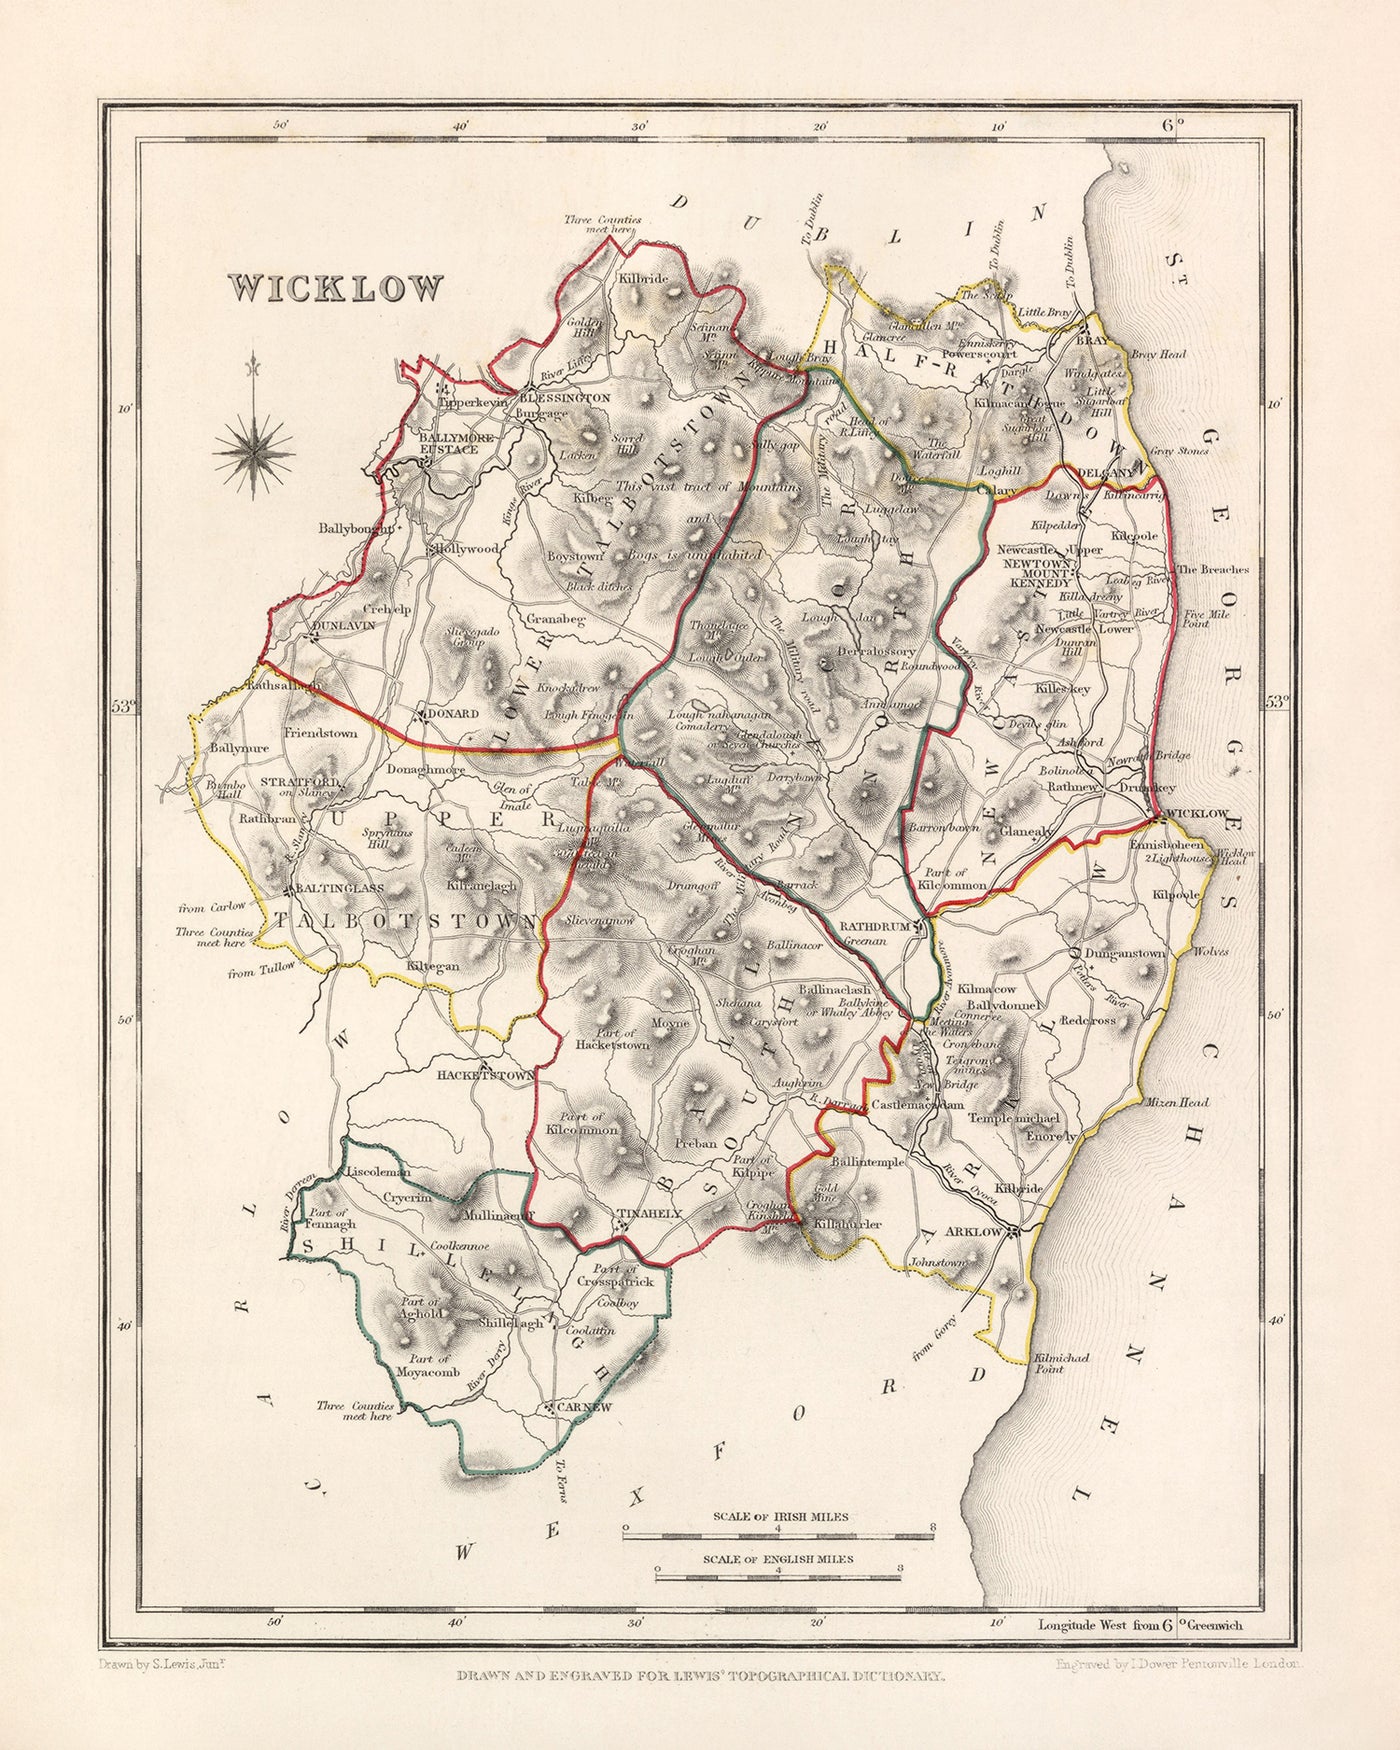 Old Map of County Wicklow by Samuel Lewis, 1844: Bray, Arklow, Baltinglass, Blessington, Glendalough